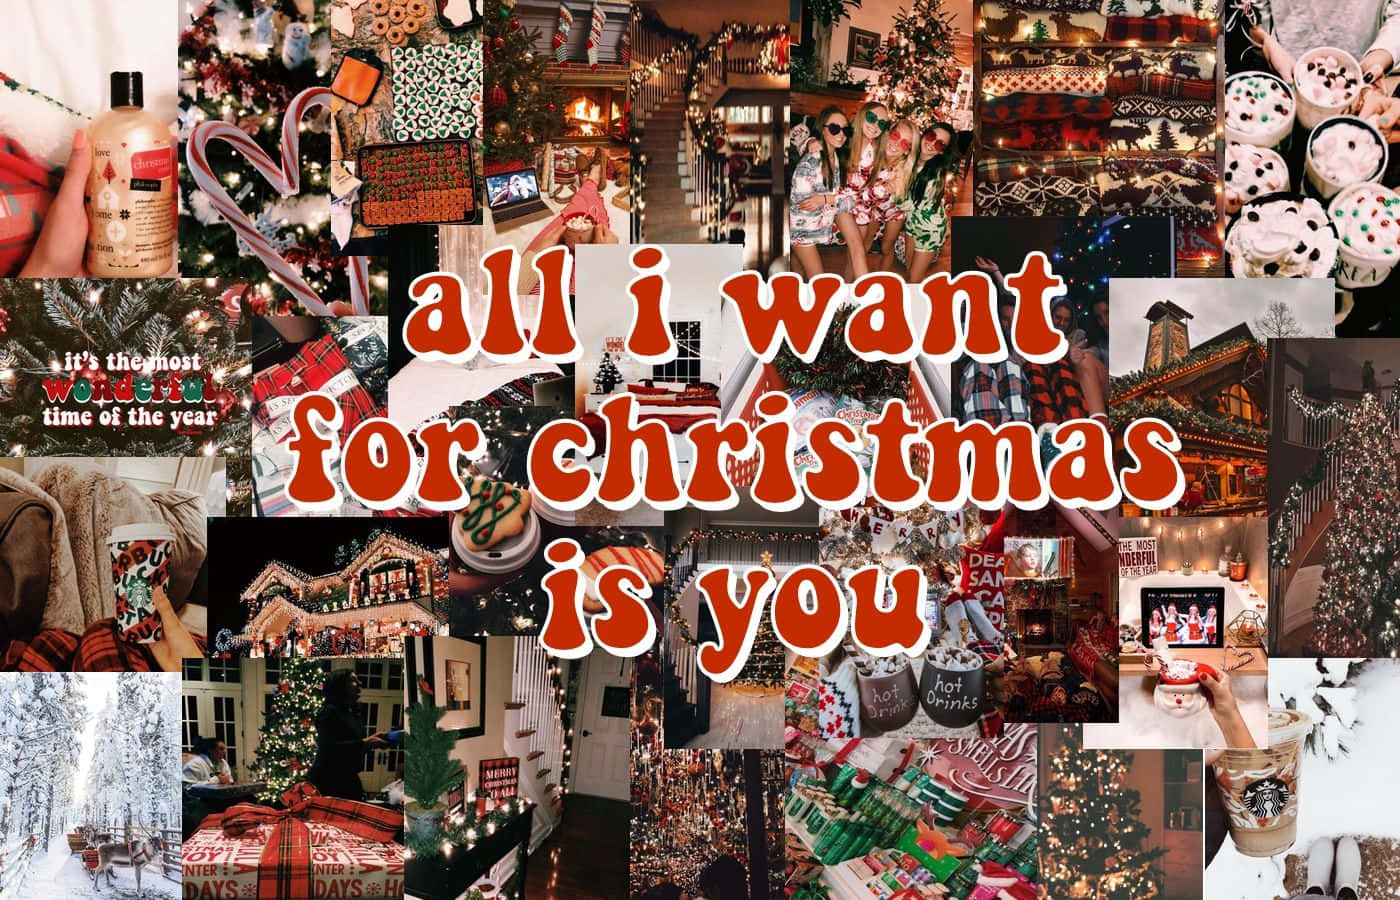 All I Want For Christmas Is You Wallpaper